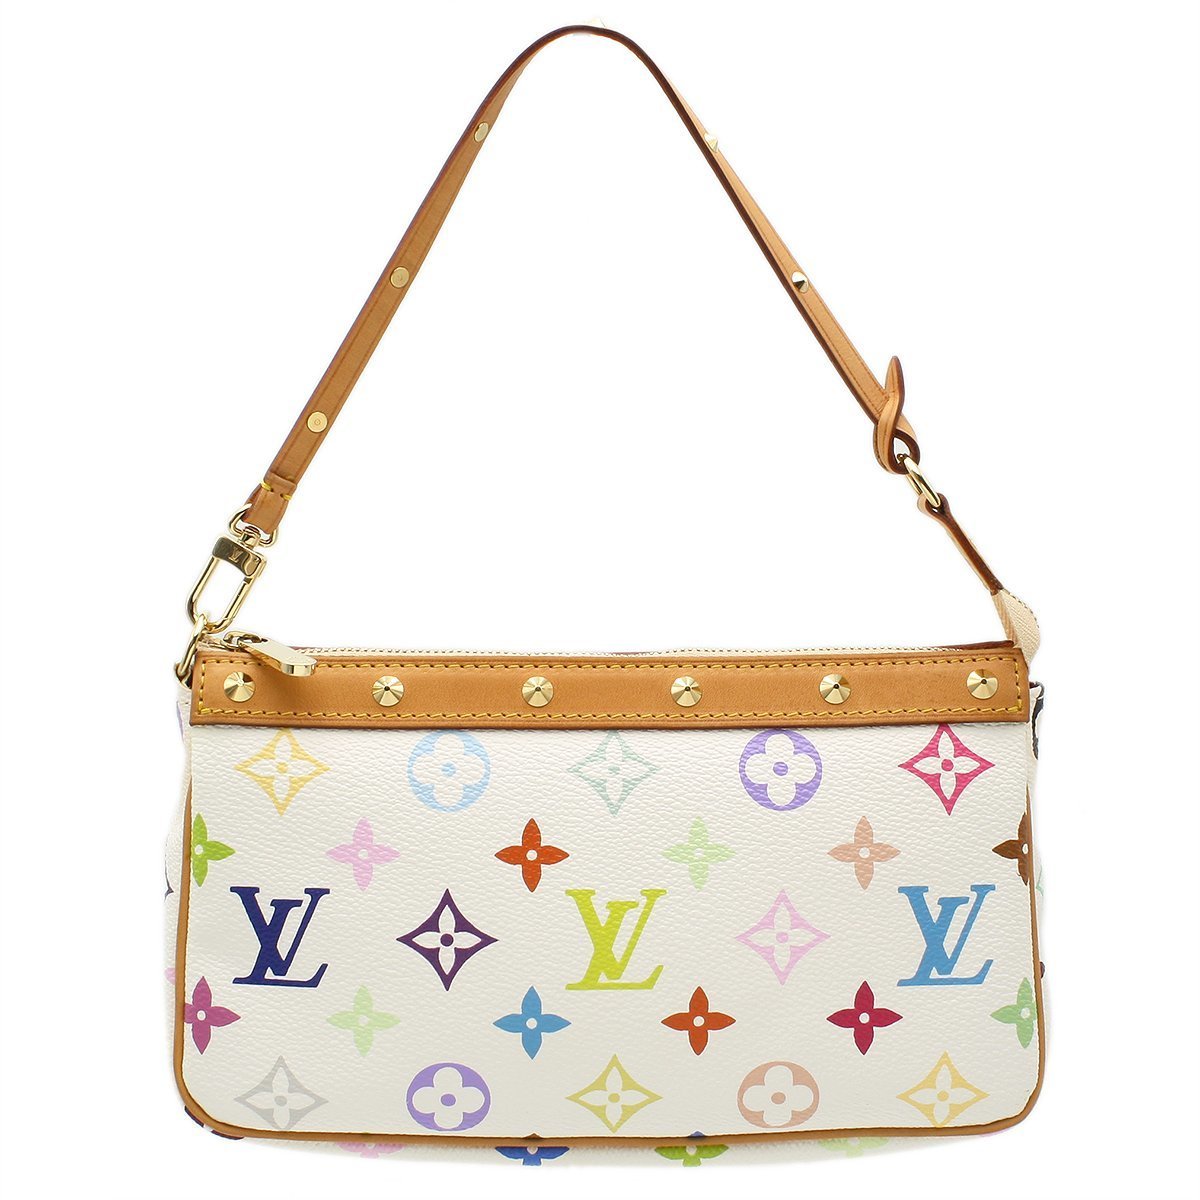 Louis Vuitton 2006 pre-owned Monogram Perforated Musette shoulder